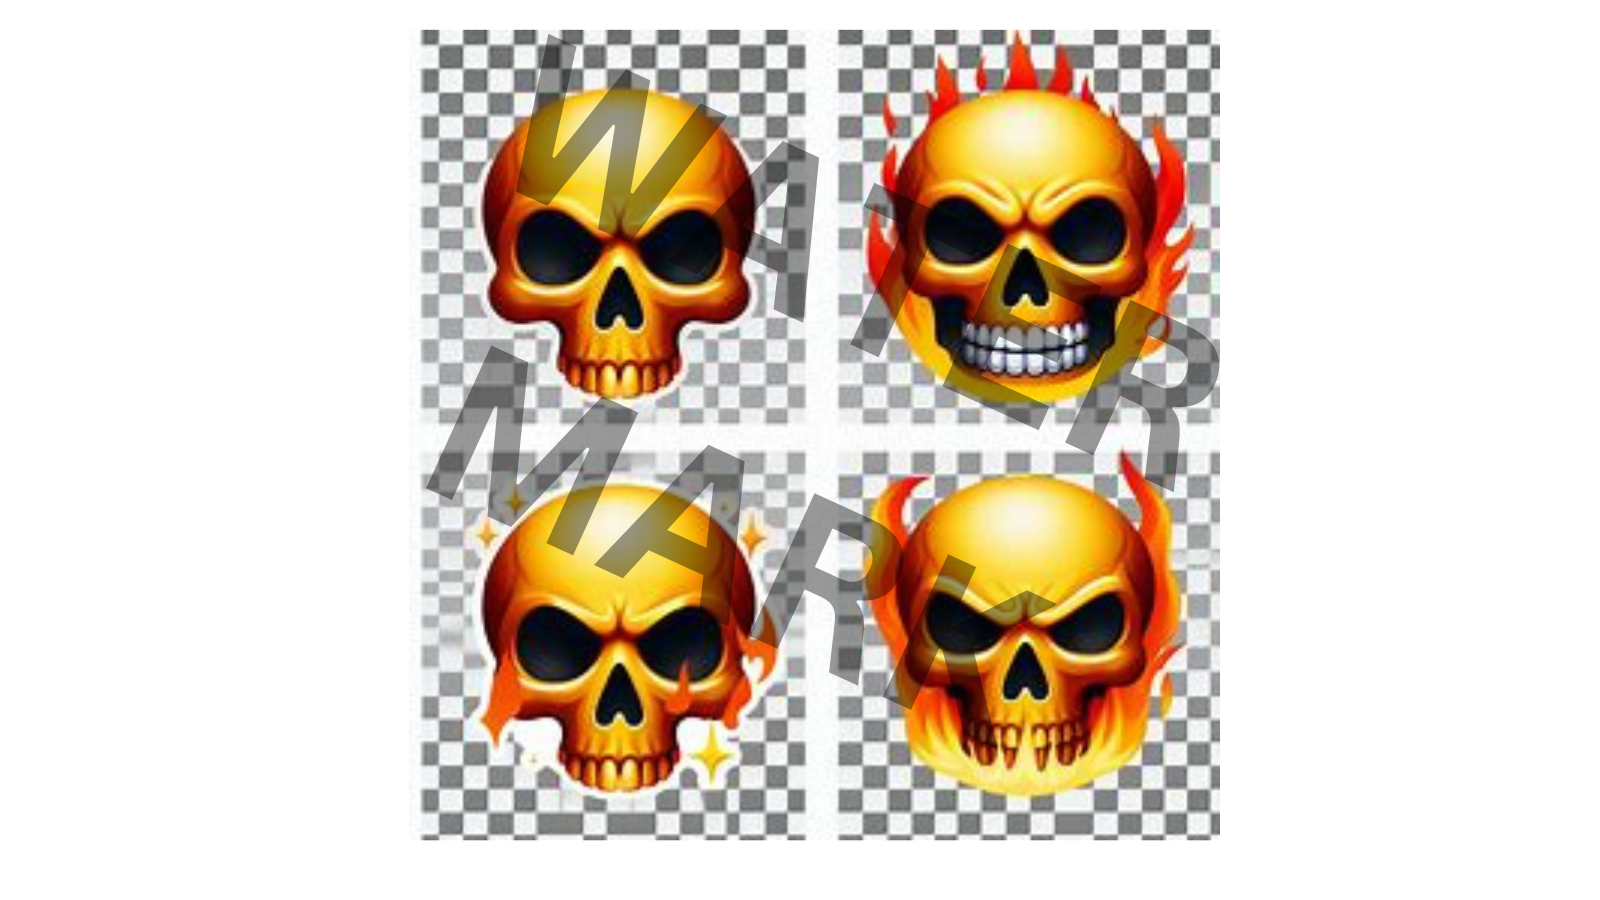 A set of four diverse skull clipart designs with flames and sparkles on transparent backgrounds, perfect for Halloween, alternative designs, and adding a touch of edge.